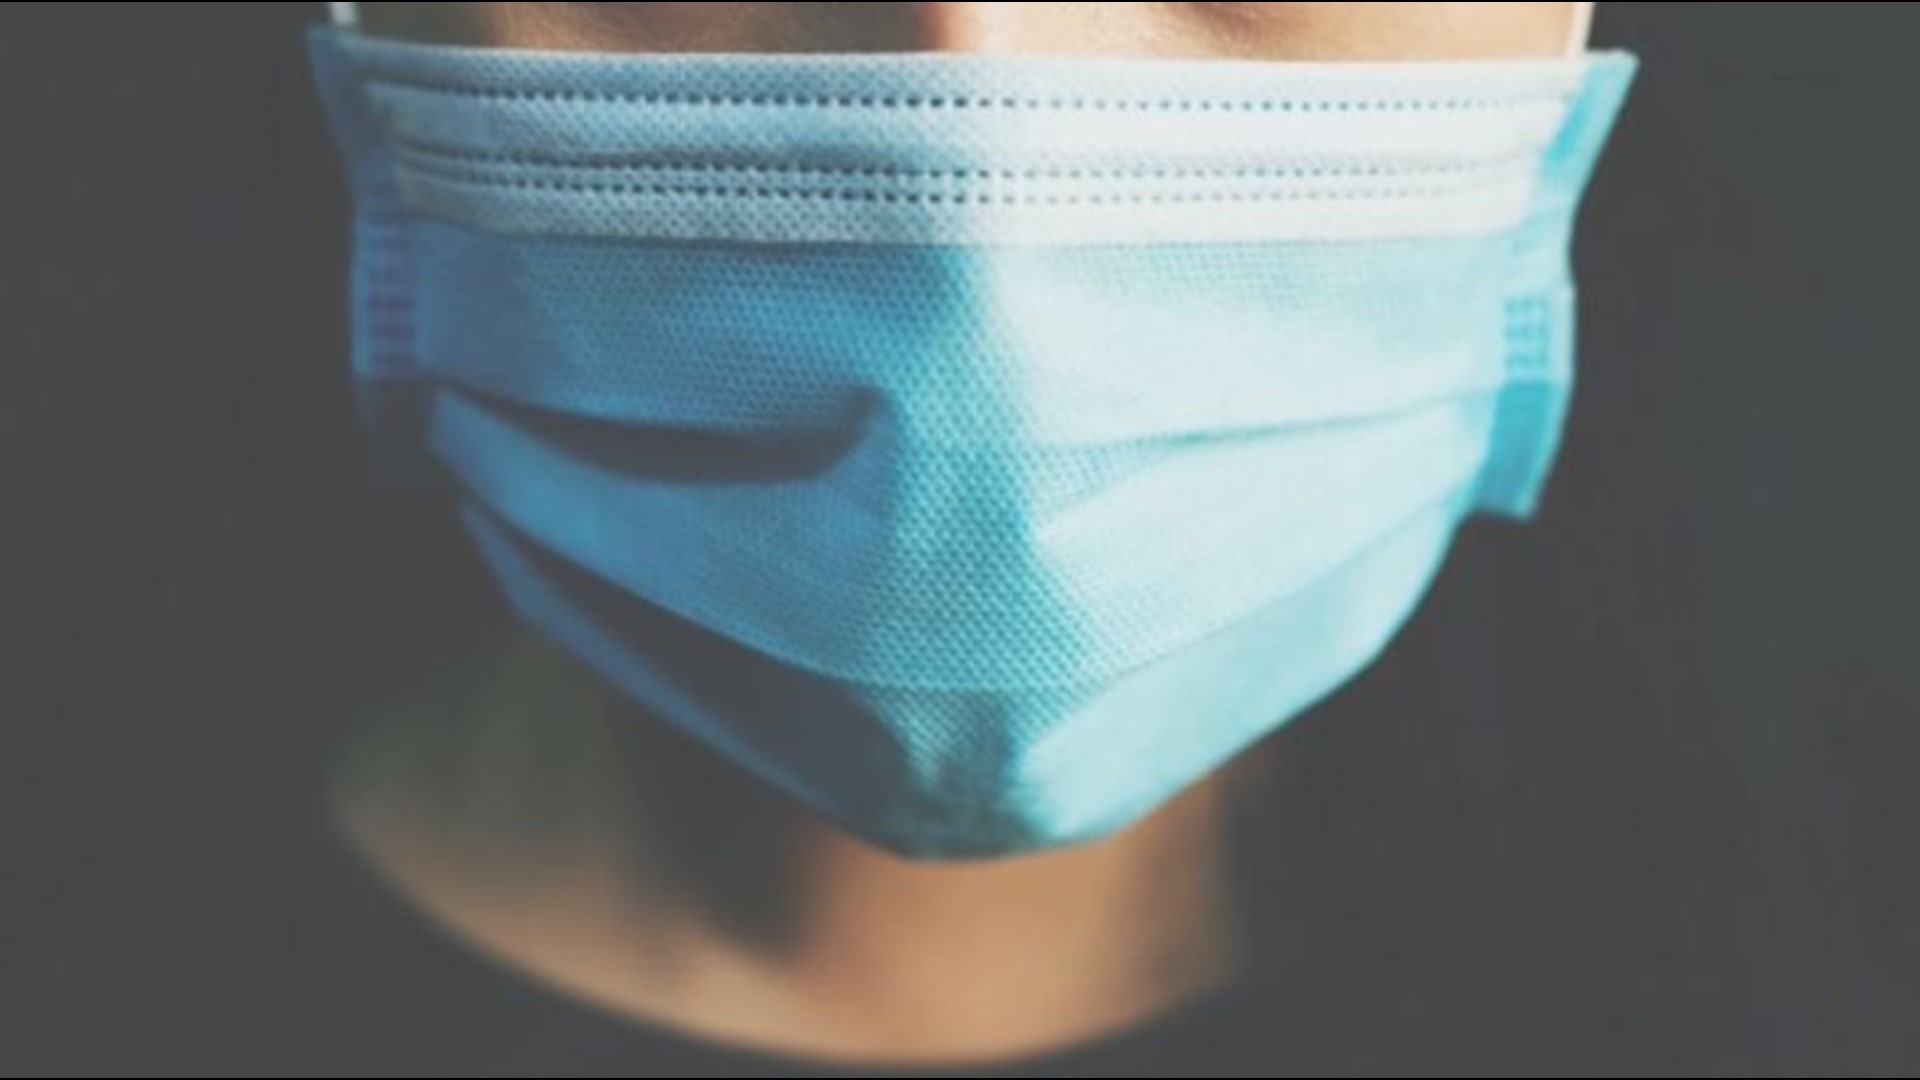 Some area doctors are seeing a spike in patients dealing with skin irritations on the face after prolonged mask wearing.